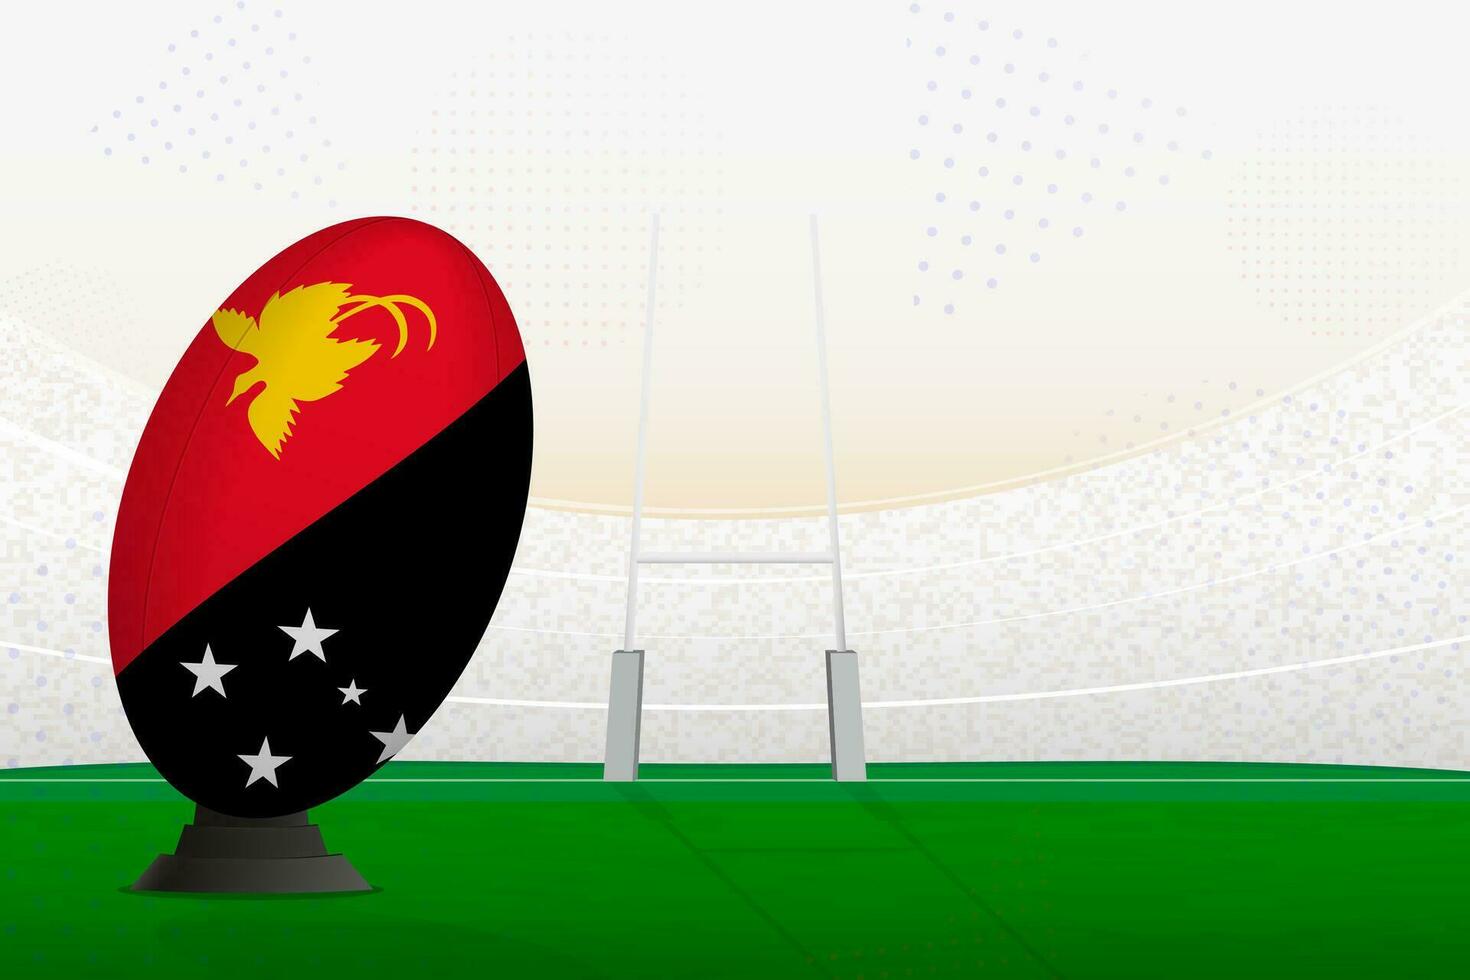 Papua New Guinea national team rugby ball on rugby stadium and goal posts, preparing for a penalty or free kick. vector